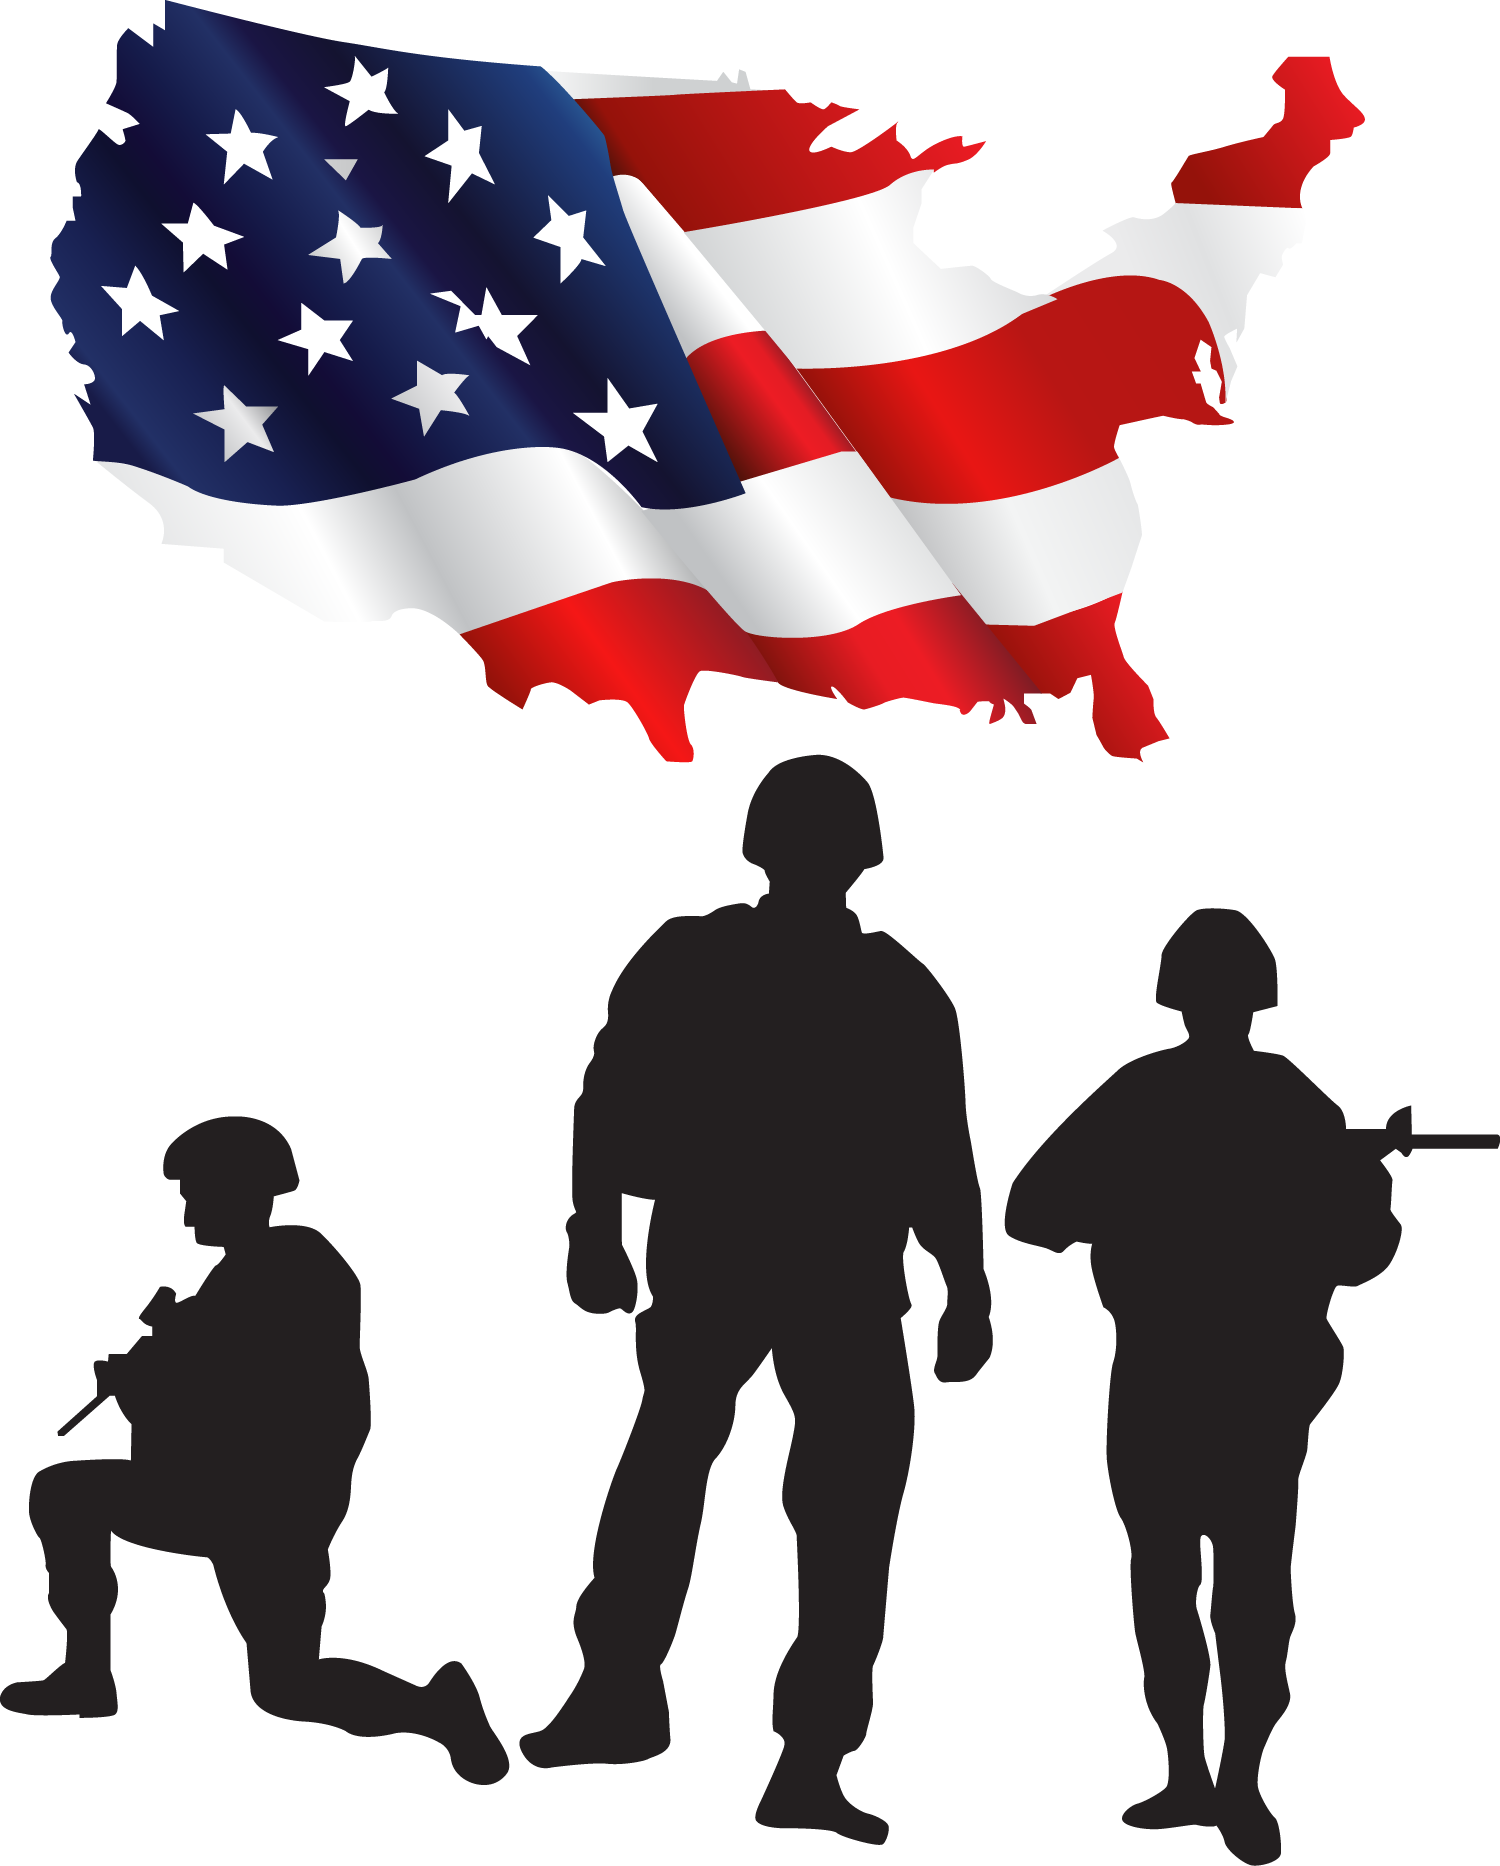 United States Soldier Salute Clip art - American soldiers ... - Veteran Soldier Silhouette